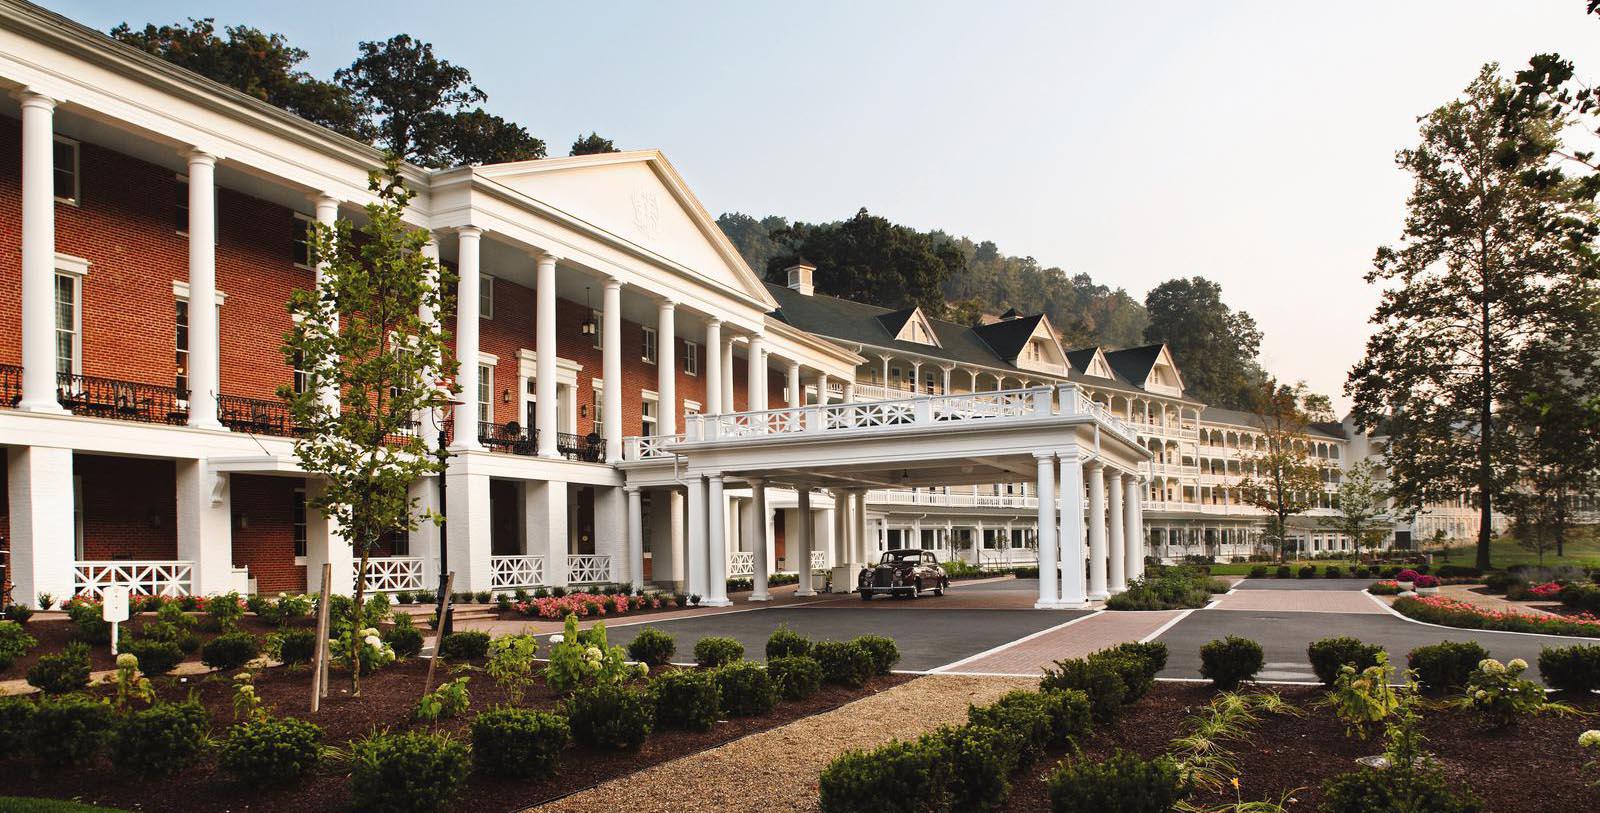 Discover the amazing heritage of the Omni Bedford Springs Resort.